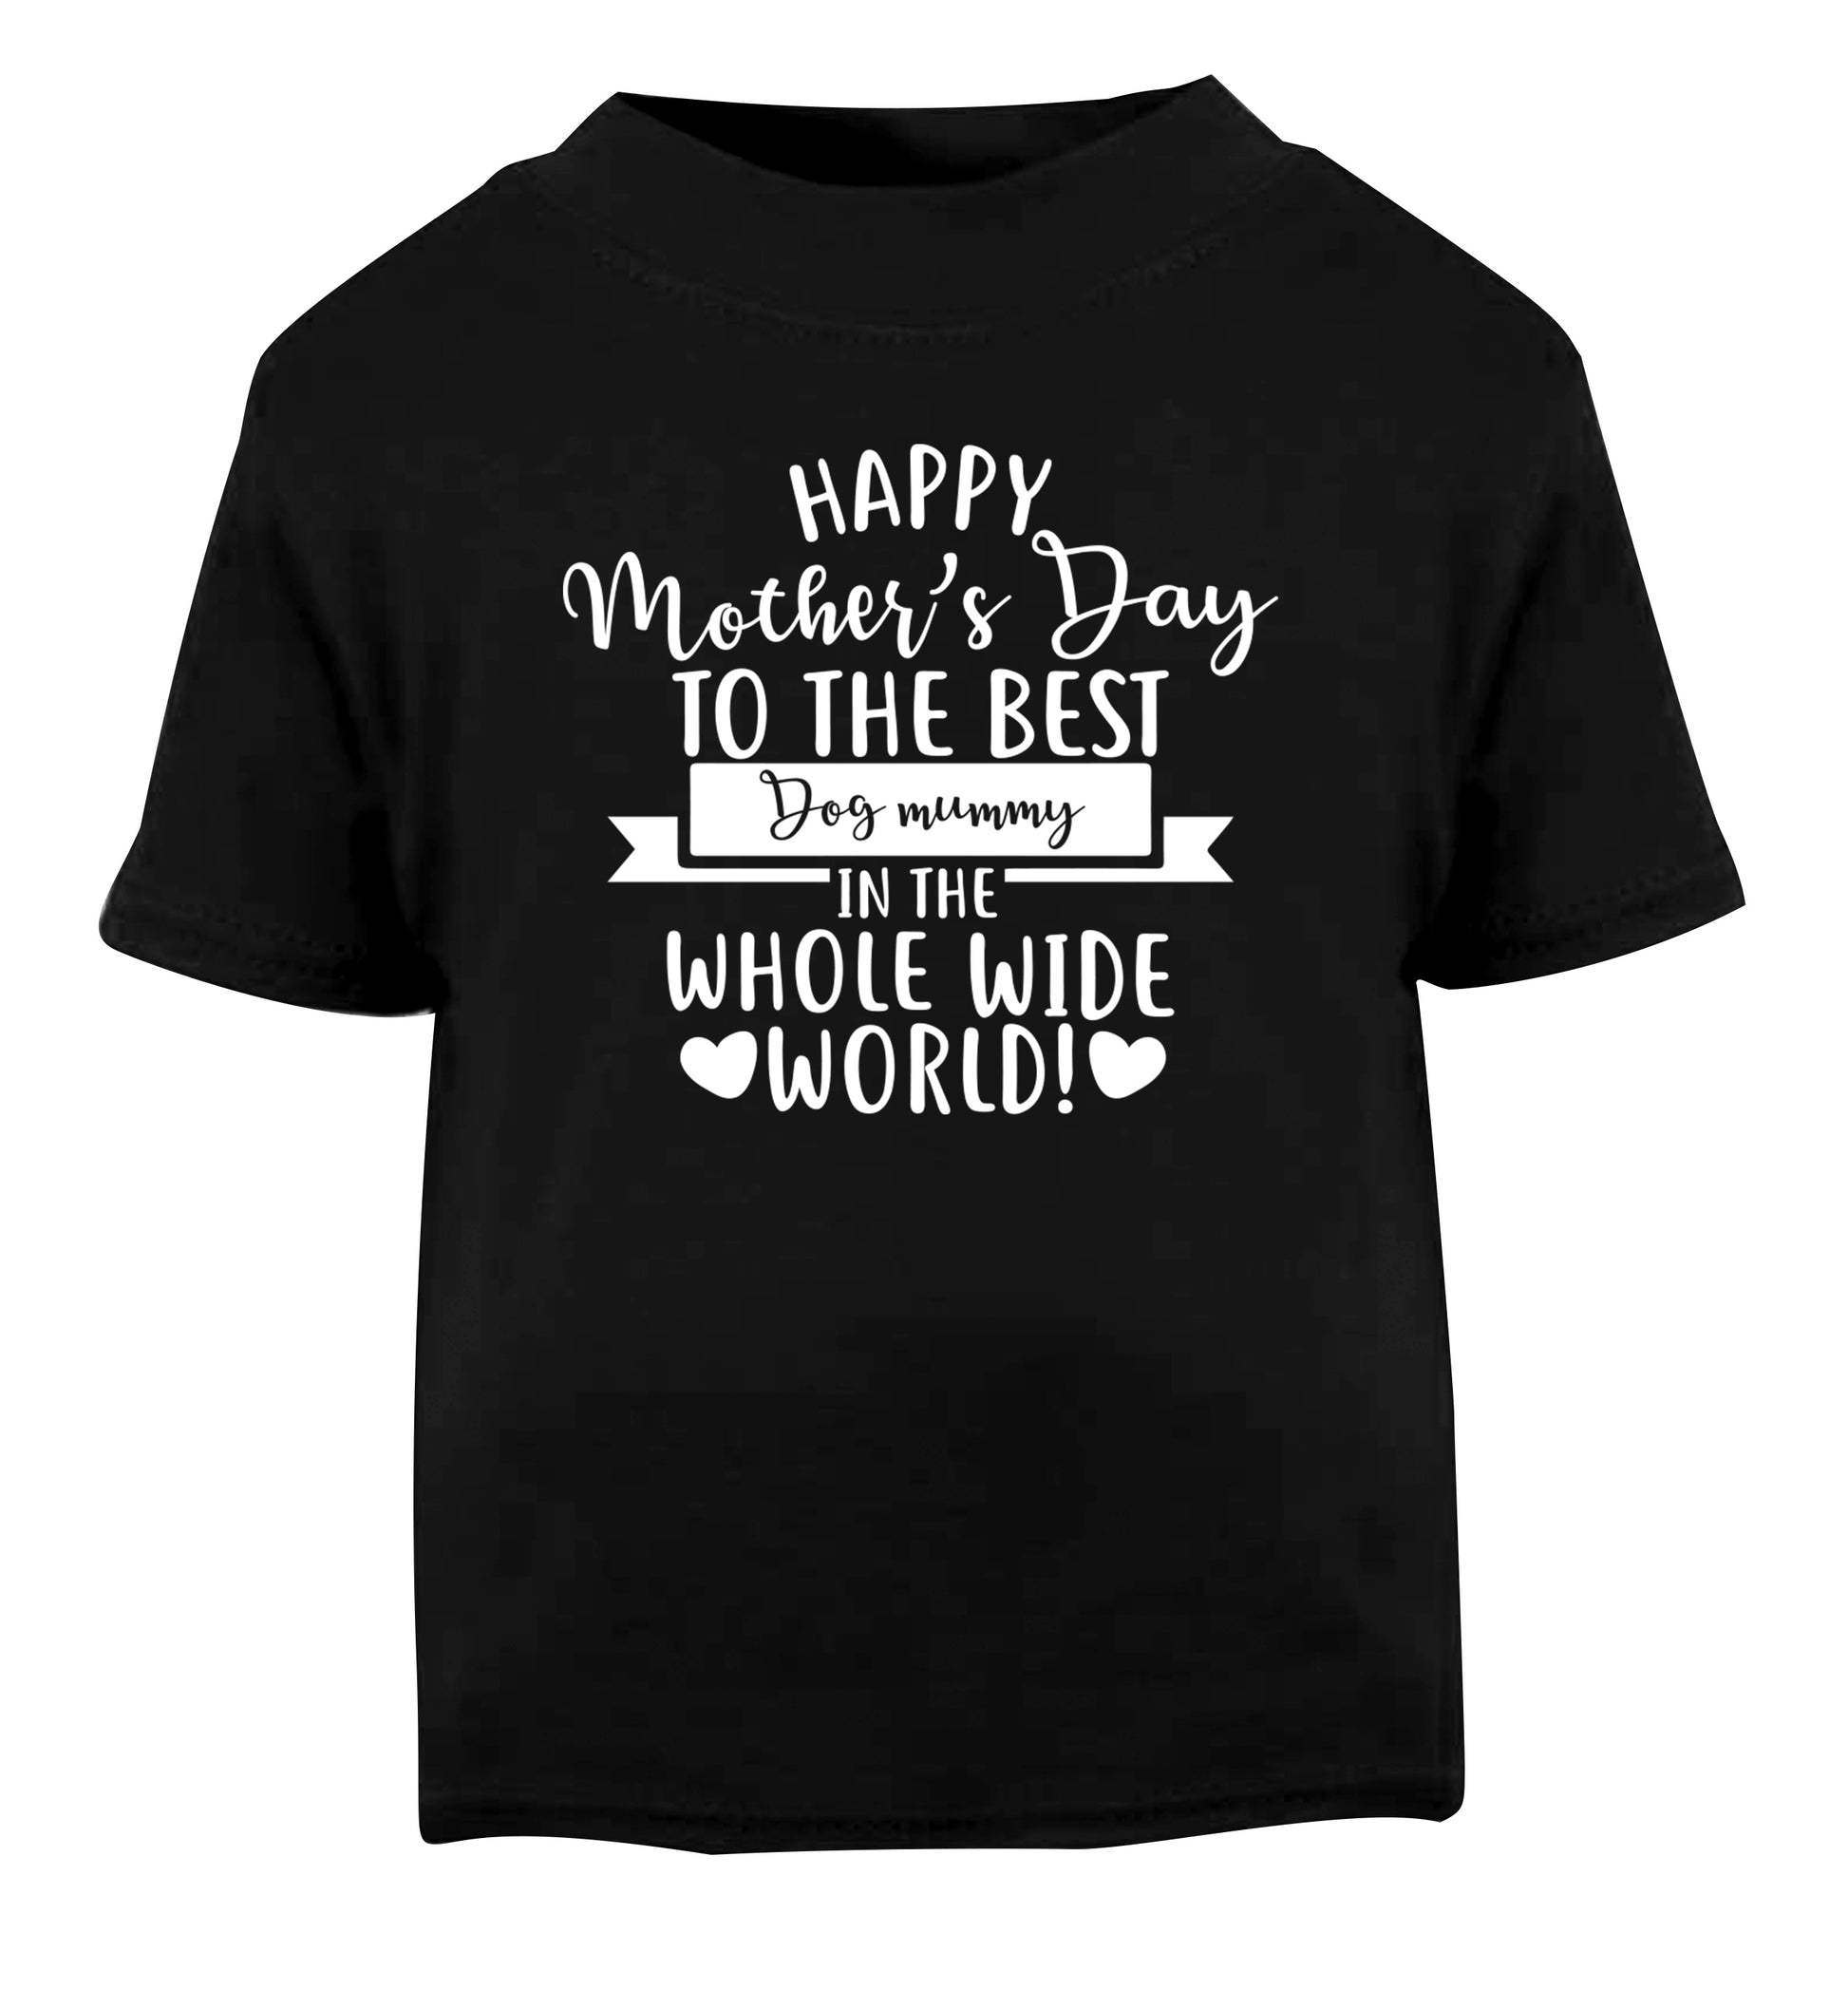 Happy mother's day to the best dog mummy in the world Black Baby Toddler Tshirt 2 years